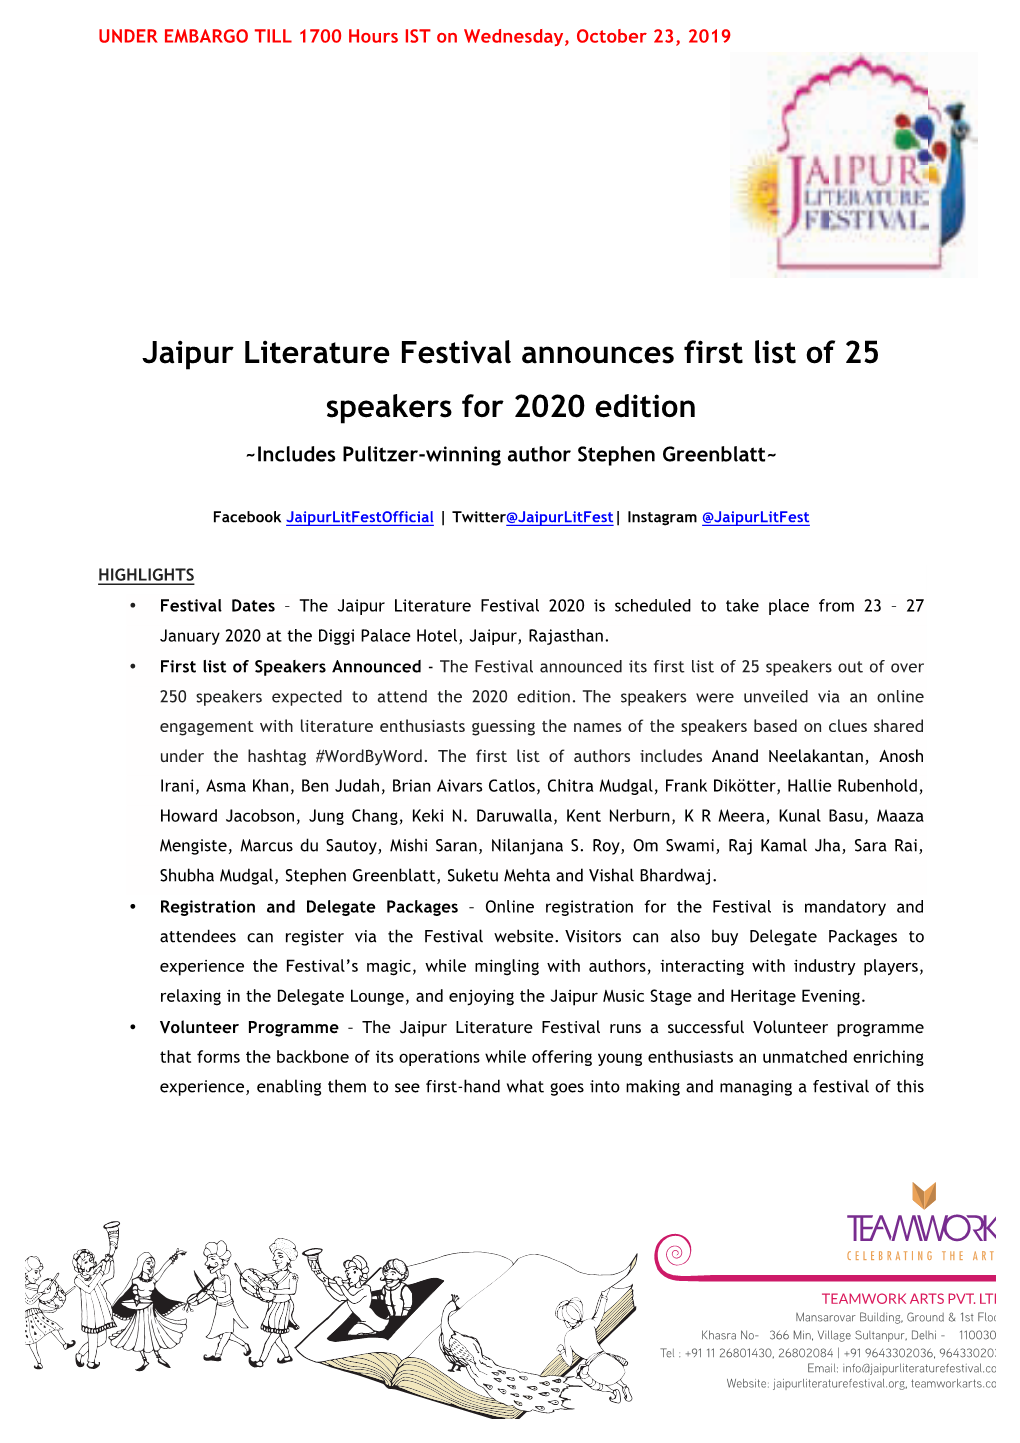 Jaipur Literature Festival Announces First List of 25 Speakers for 2020 Edition